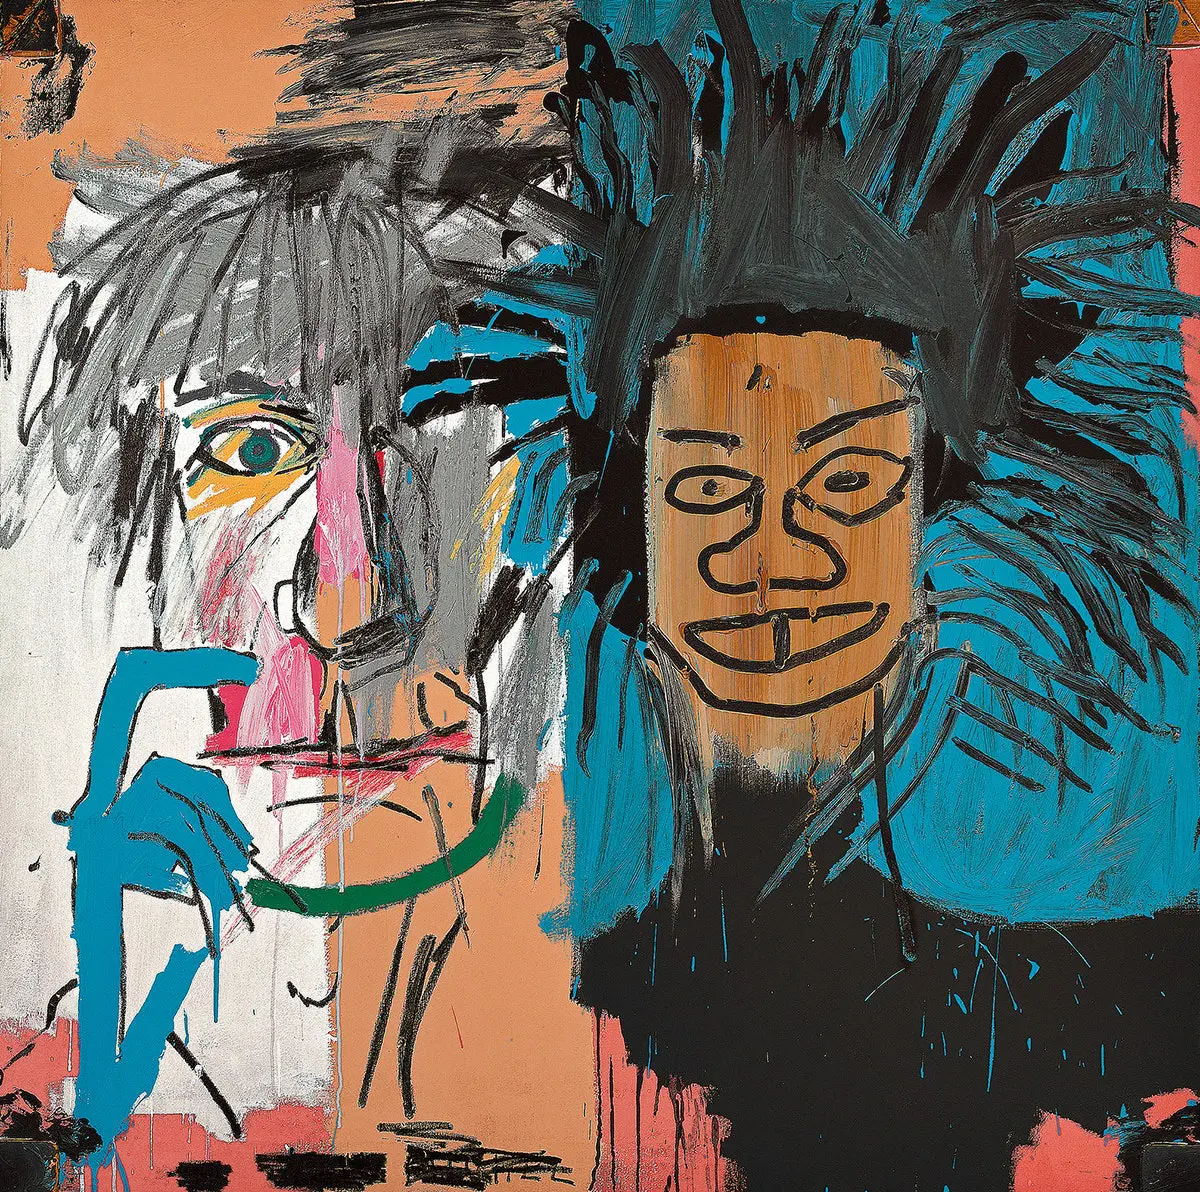 Andy Warhol's Enigmatic Relationship with Jean-Michel Basquiat